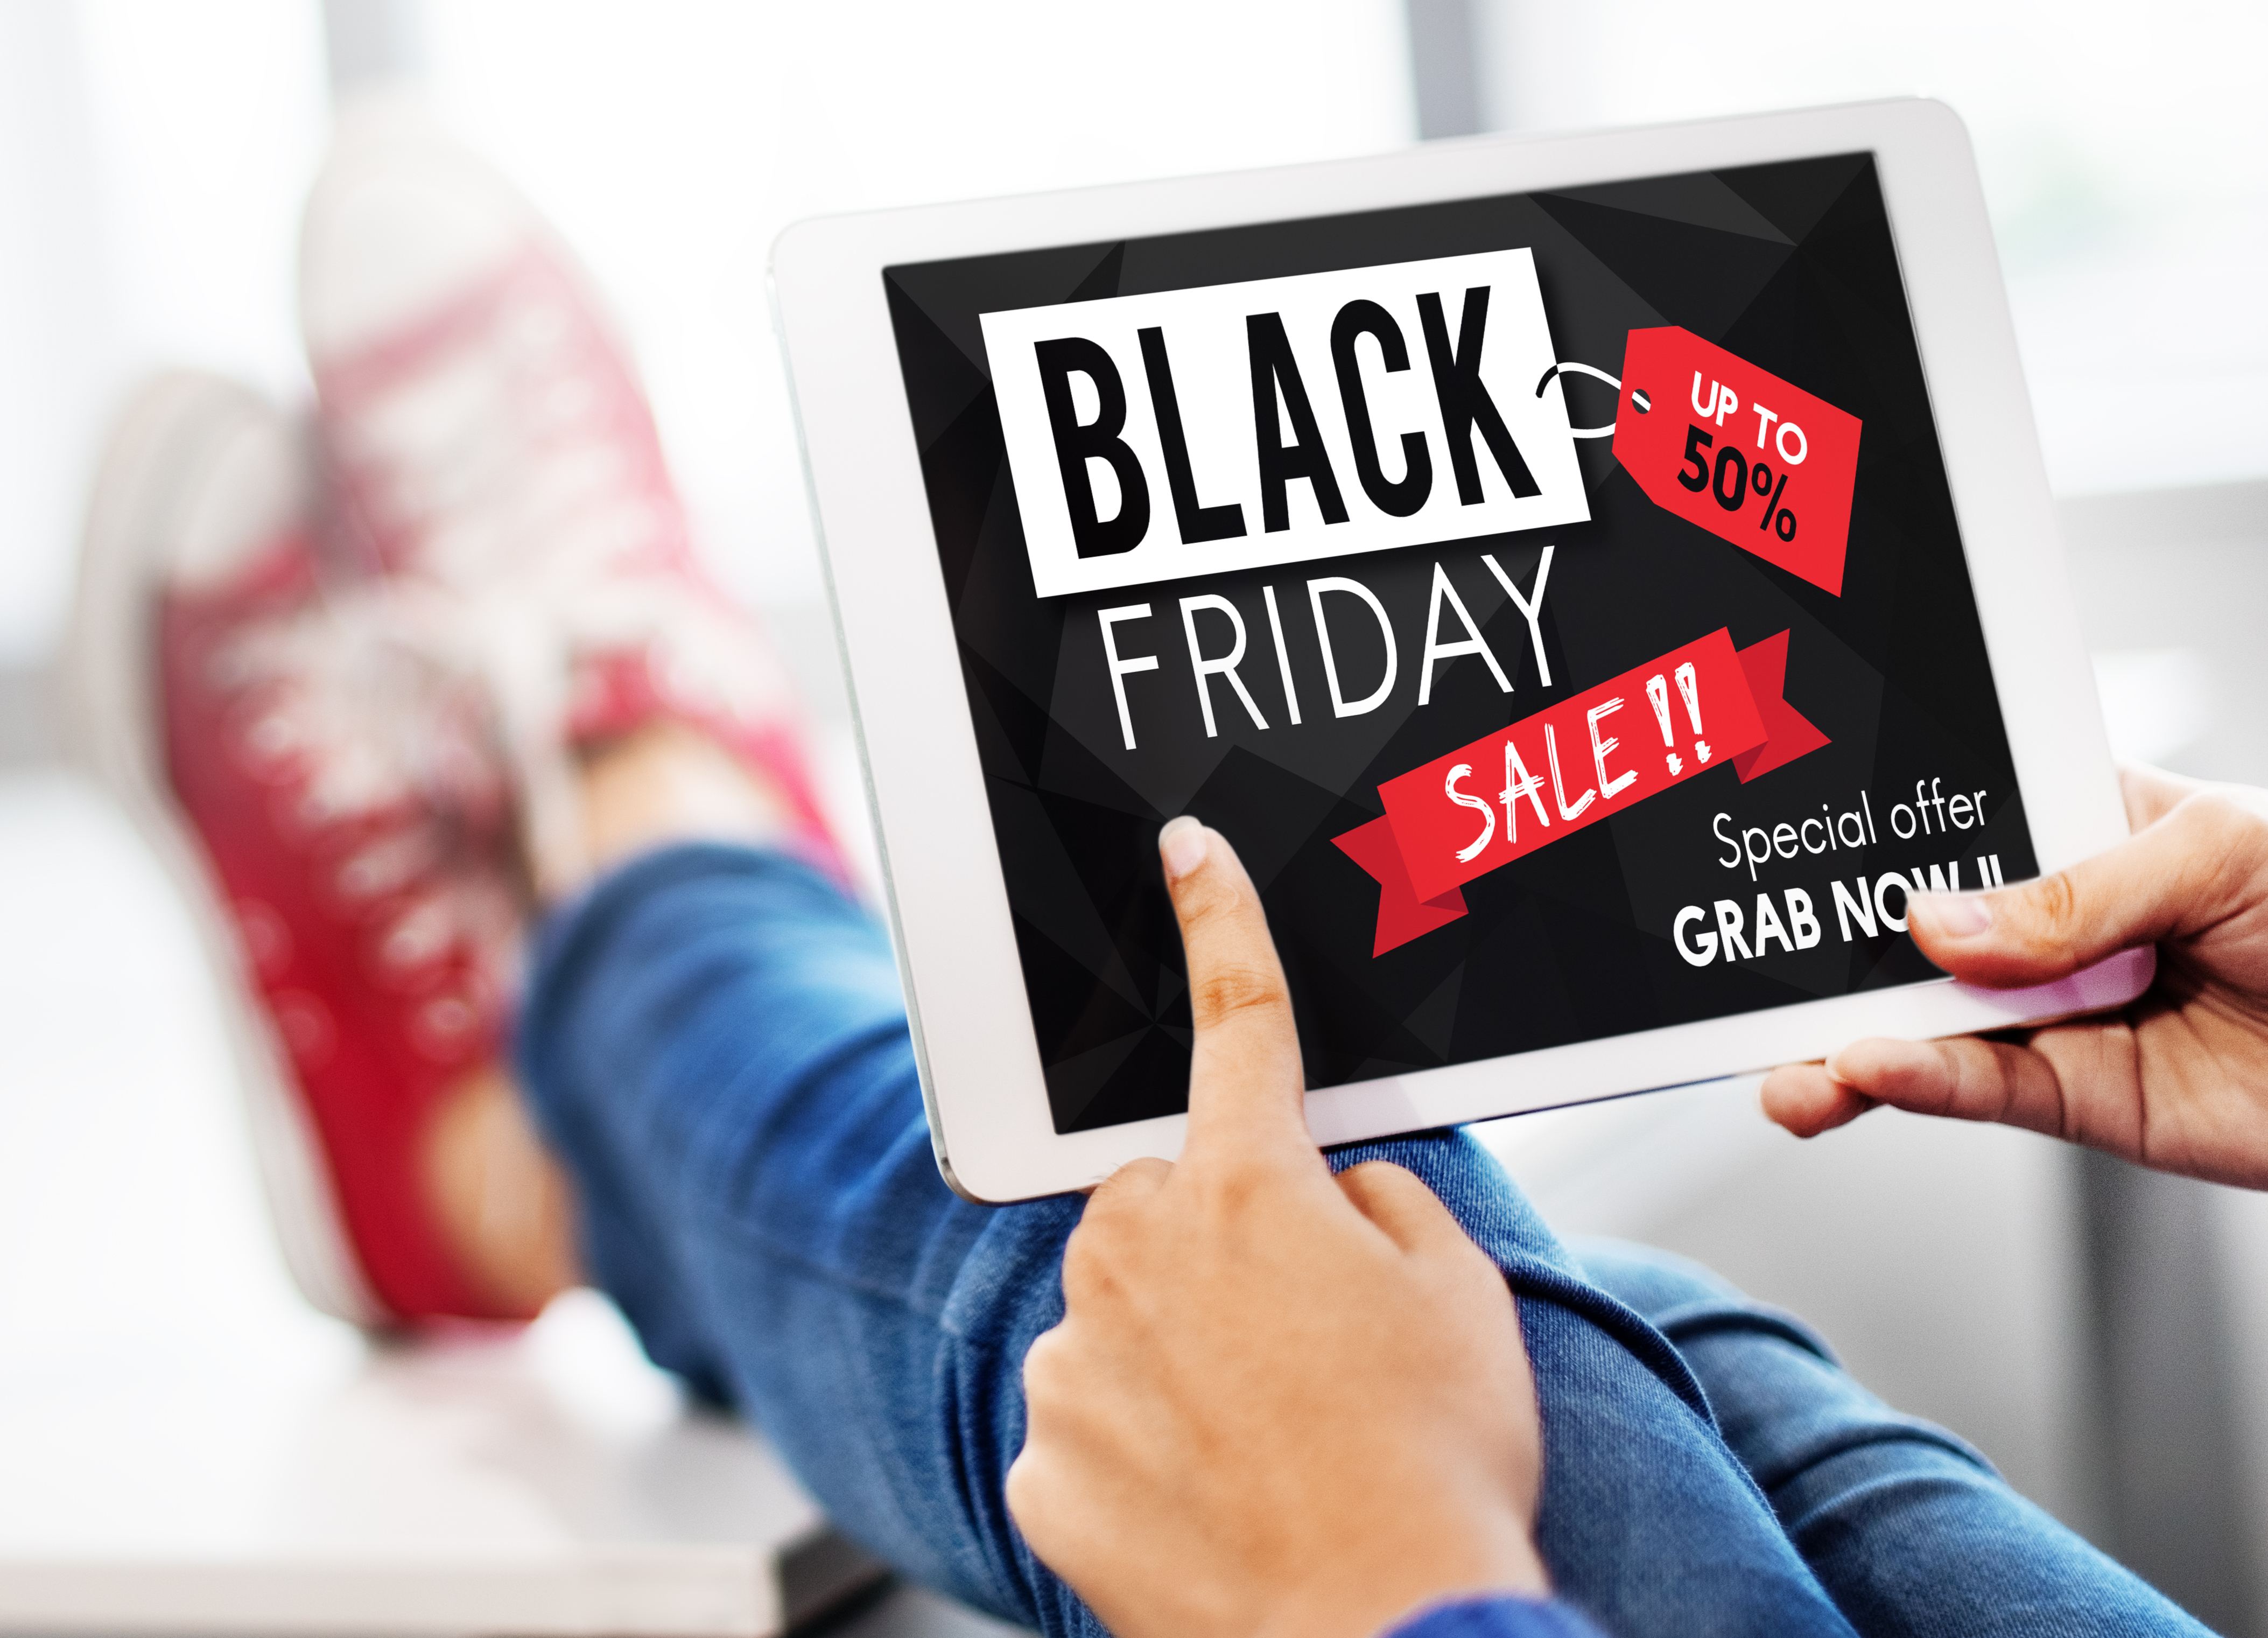 Shoppers on Black Friday set a new record in 2022 by spending .12 billion in a single day